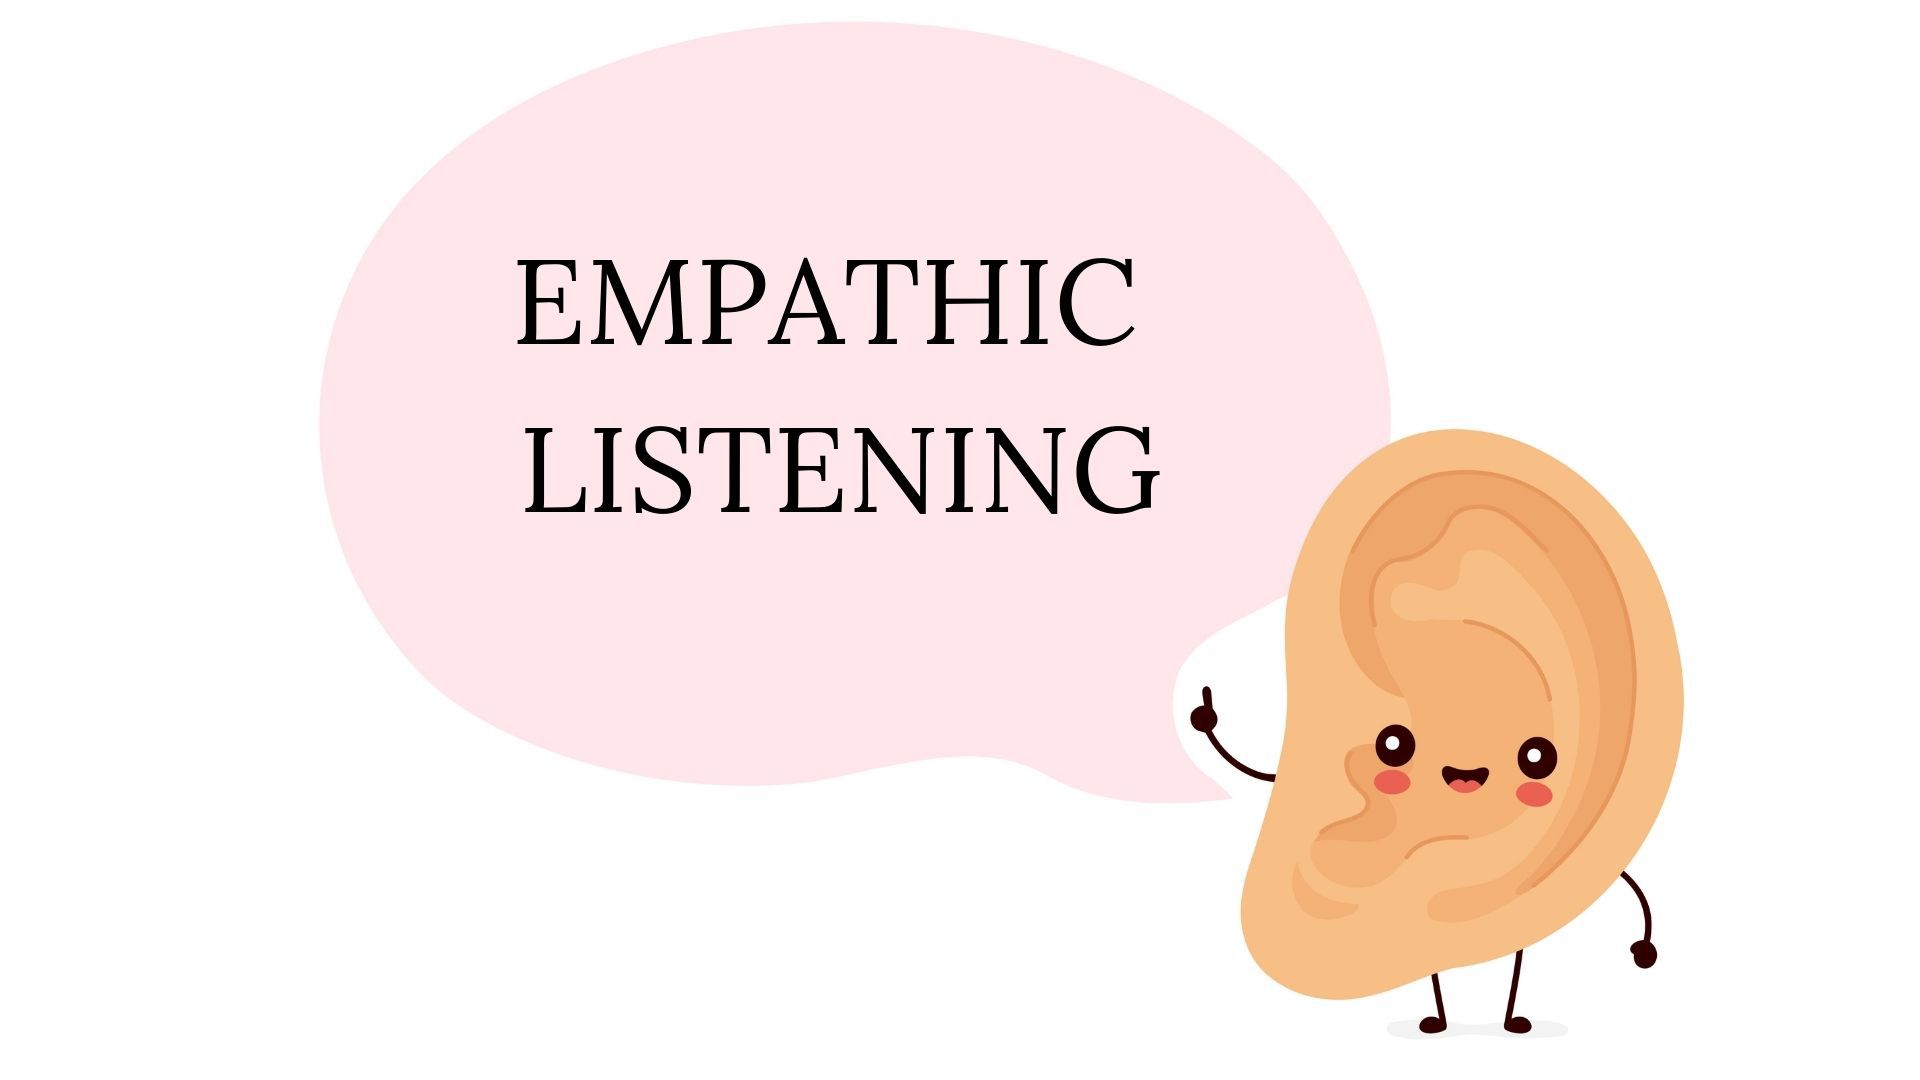 paraphrasing is rarely used in empathic listening